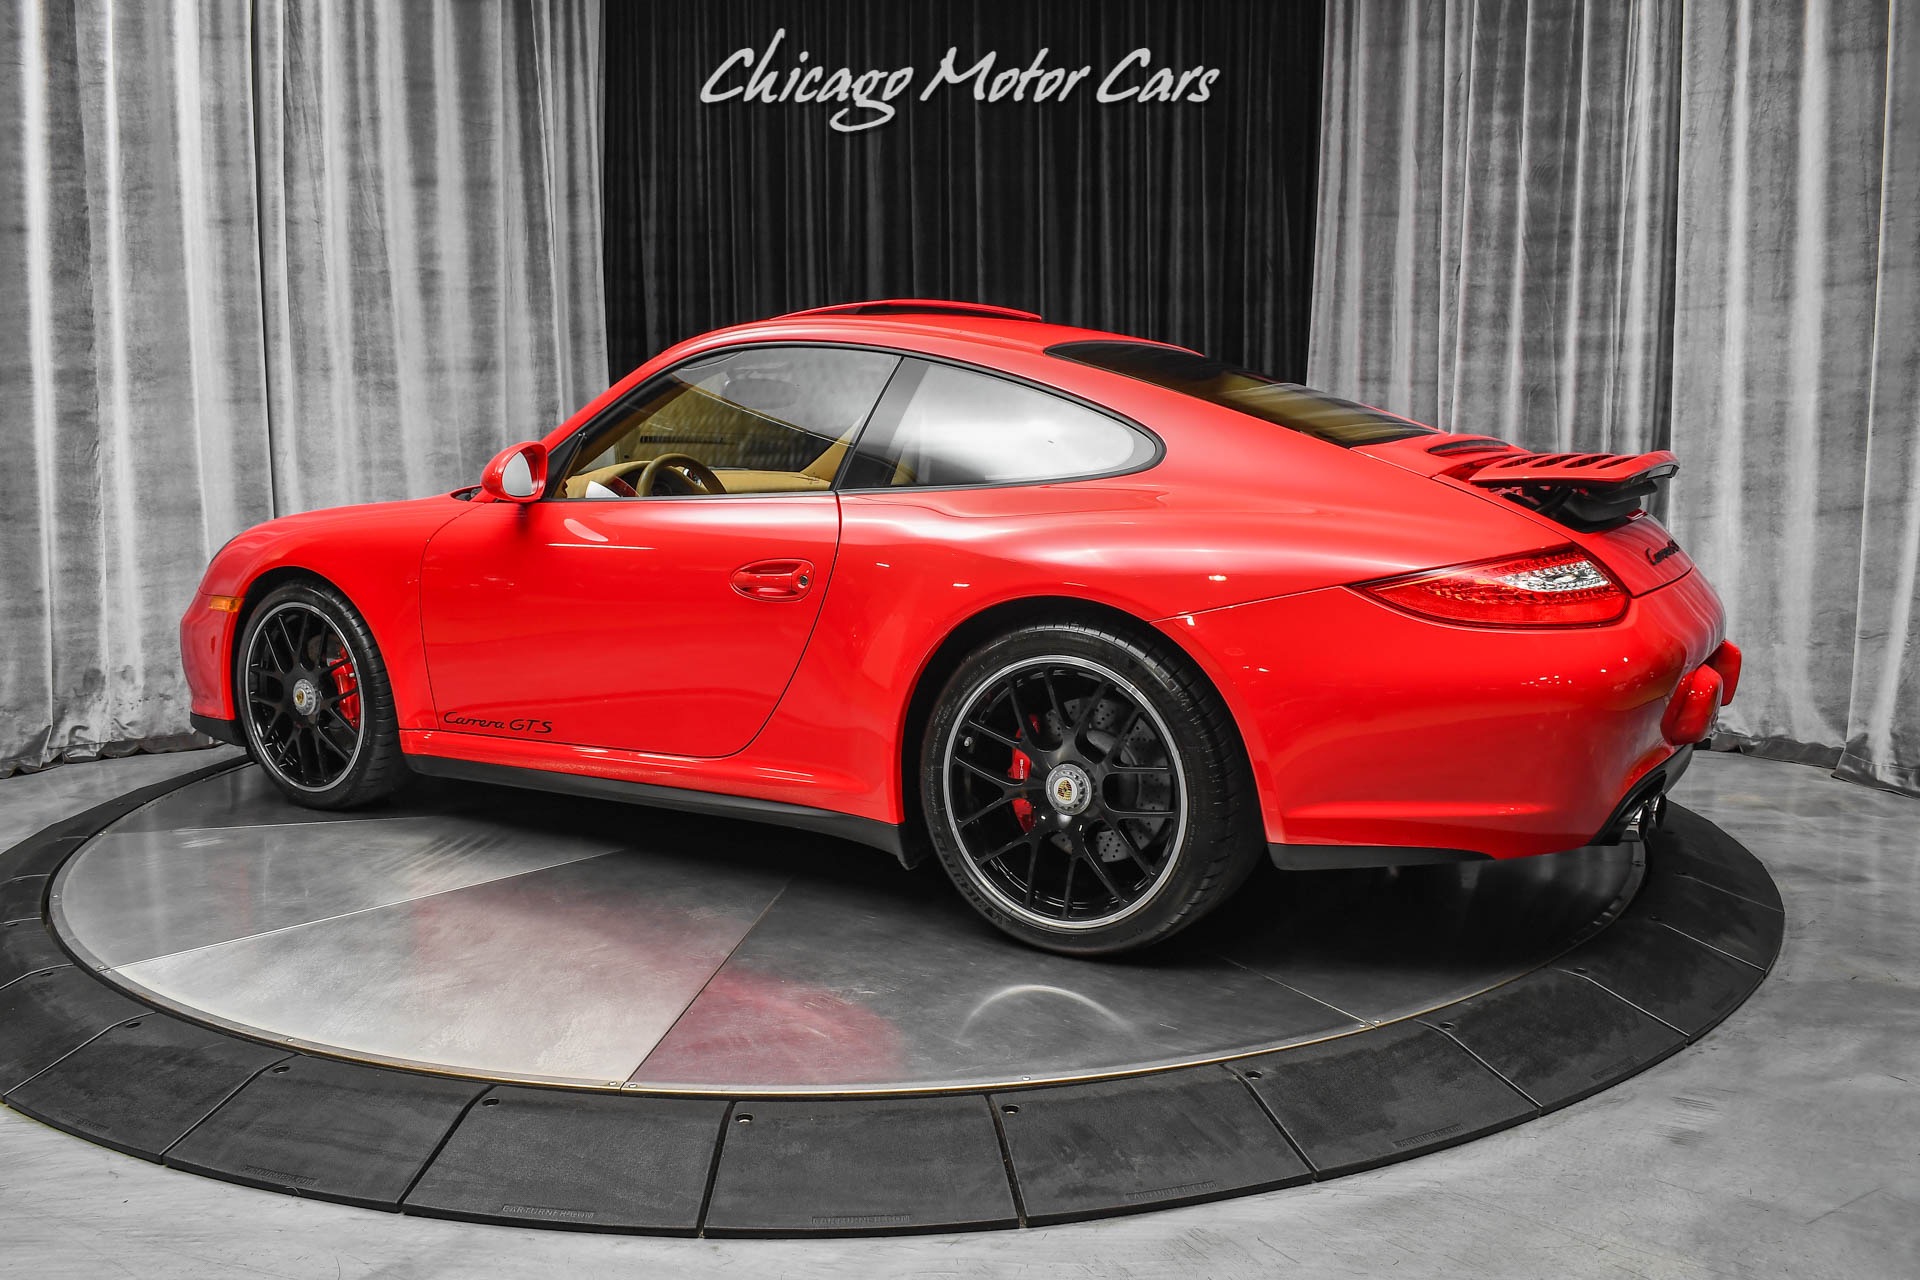 Used-2012-Porsche-911-GTS-Coupe-Only-16k-Miles-Guards-Red-LOADED-Center-Lock-Wheels-Serviced